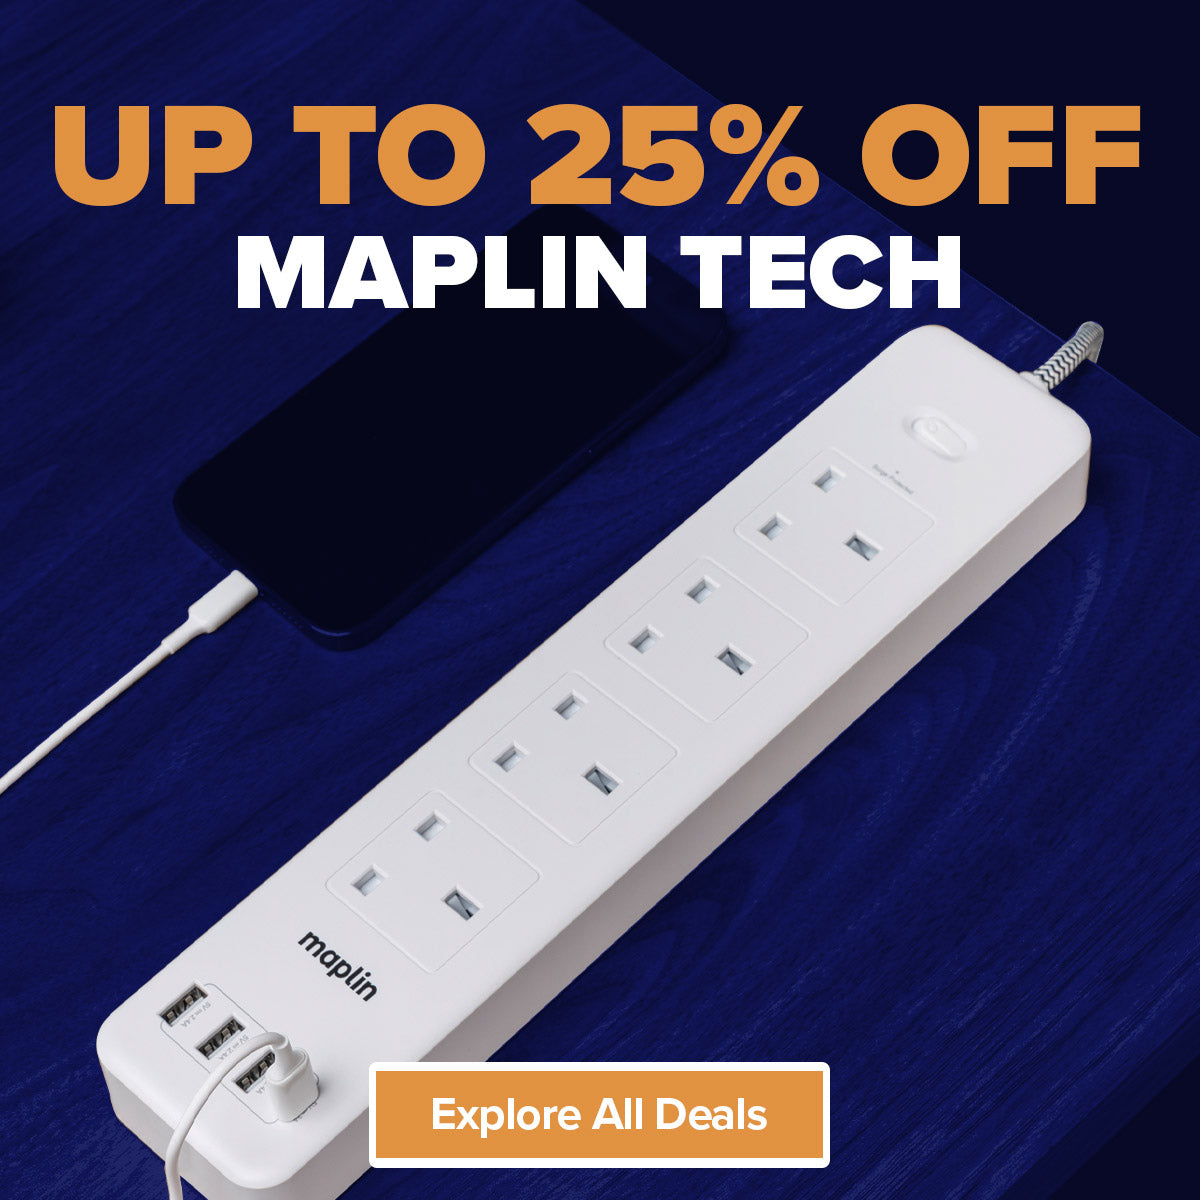 Save up to 25% off Maplin Tech with our January Sale deals!